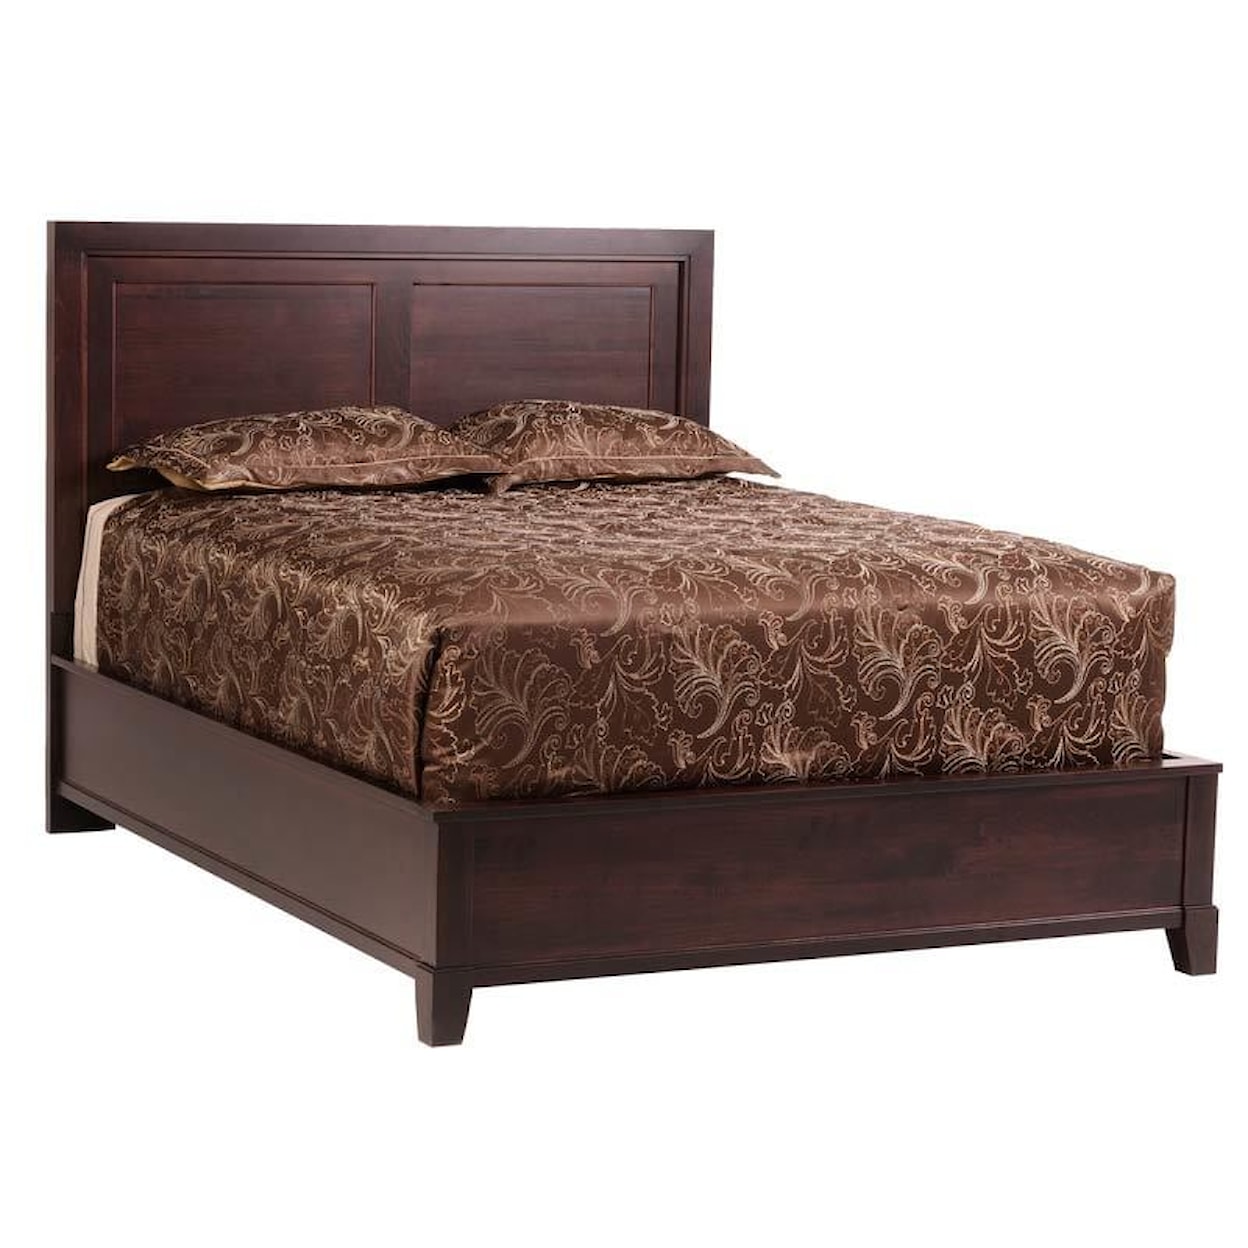 Millcraft Greenwich Full Panel Bed